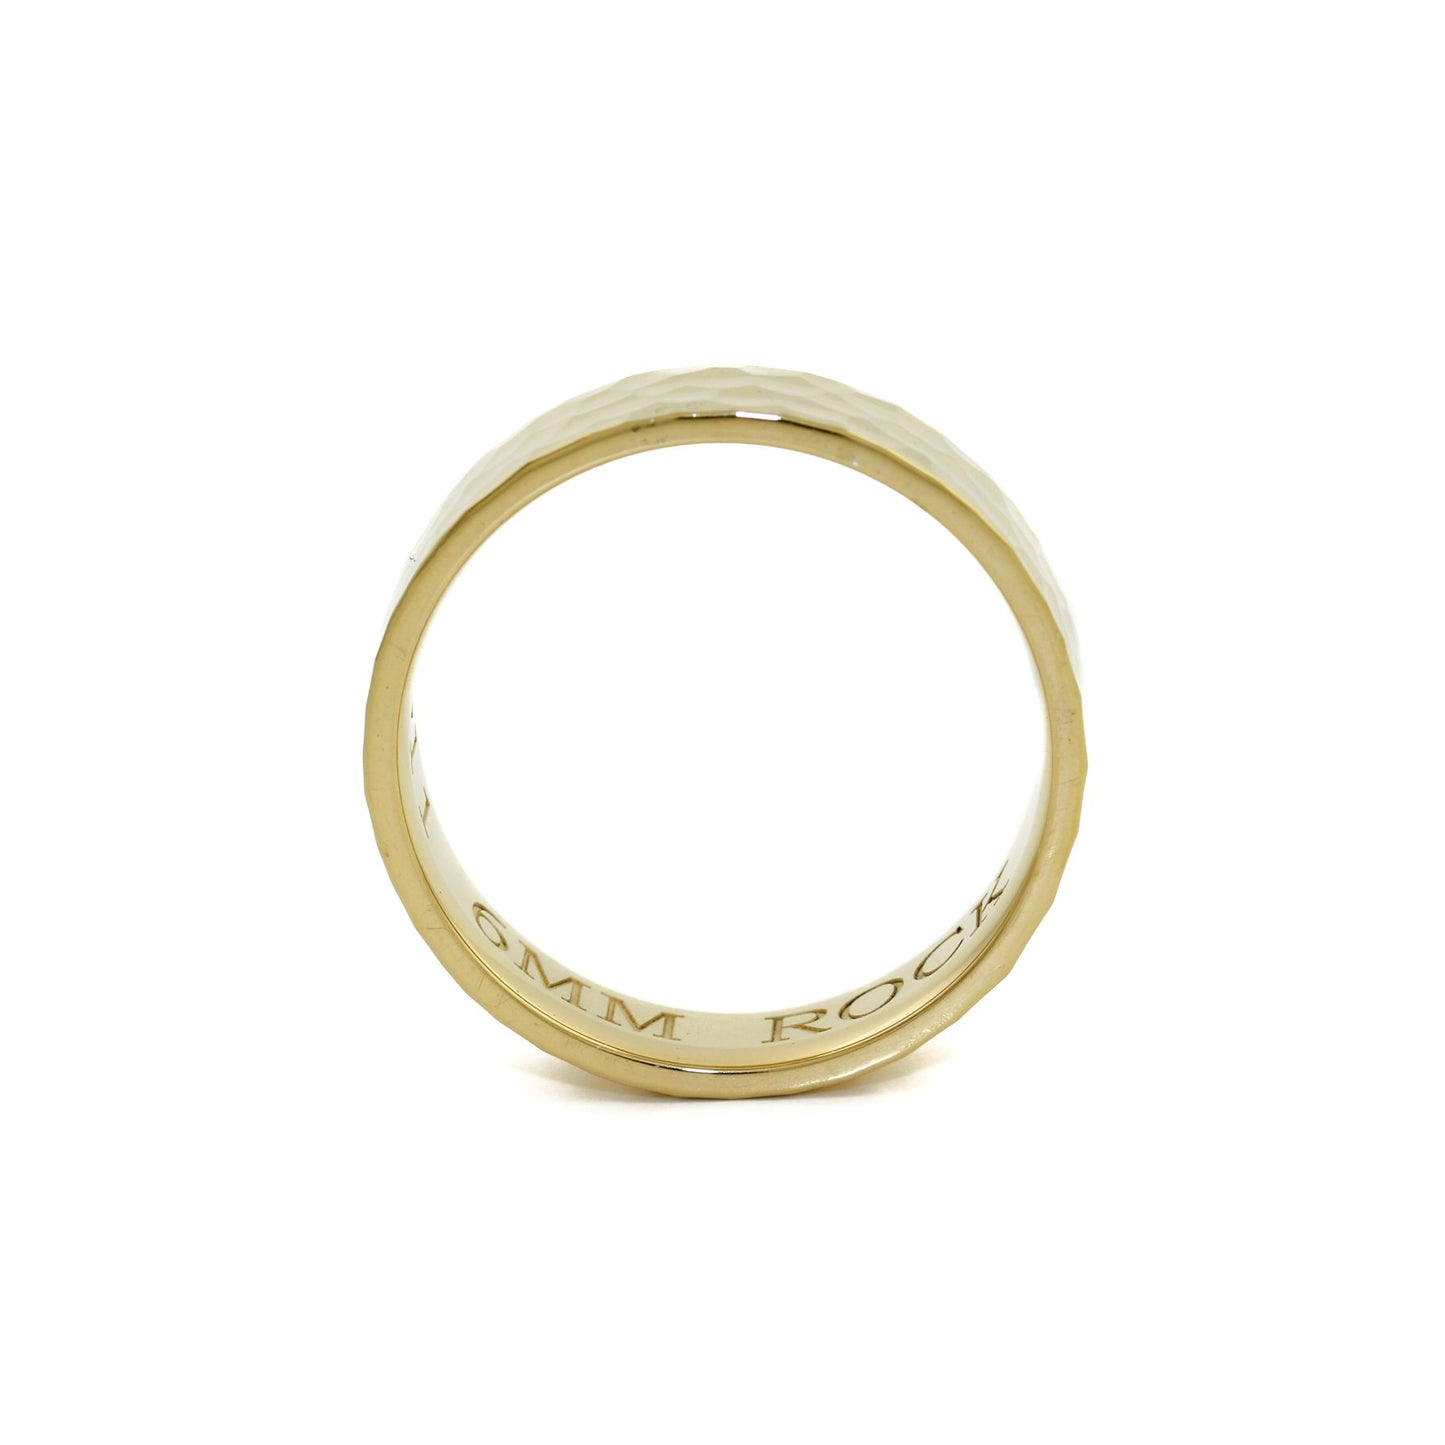 Contemporary Hammered Band - Kingdom Jewelry